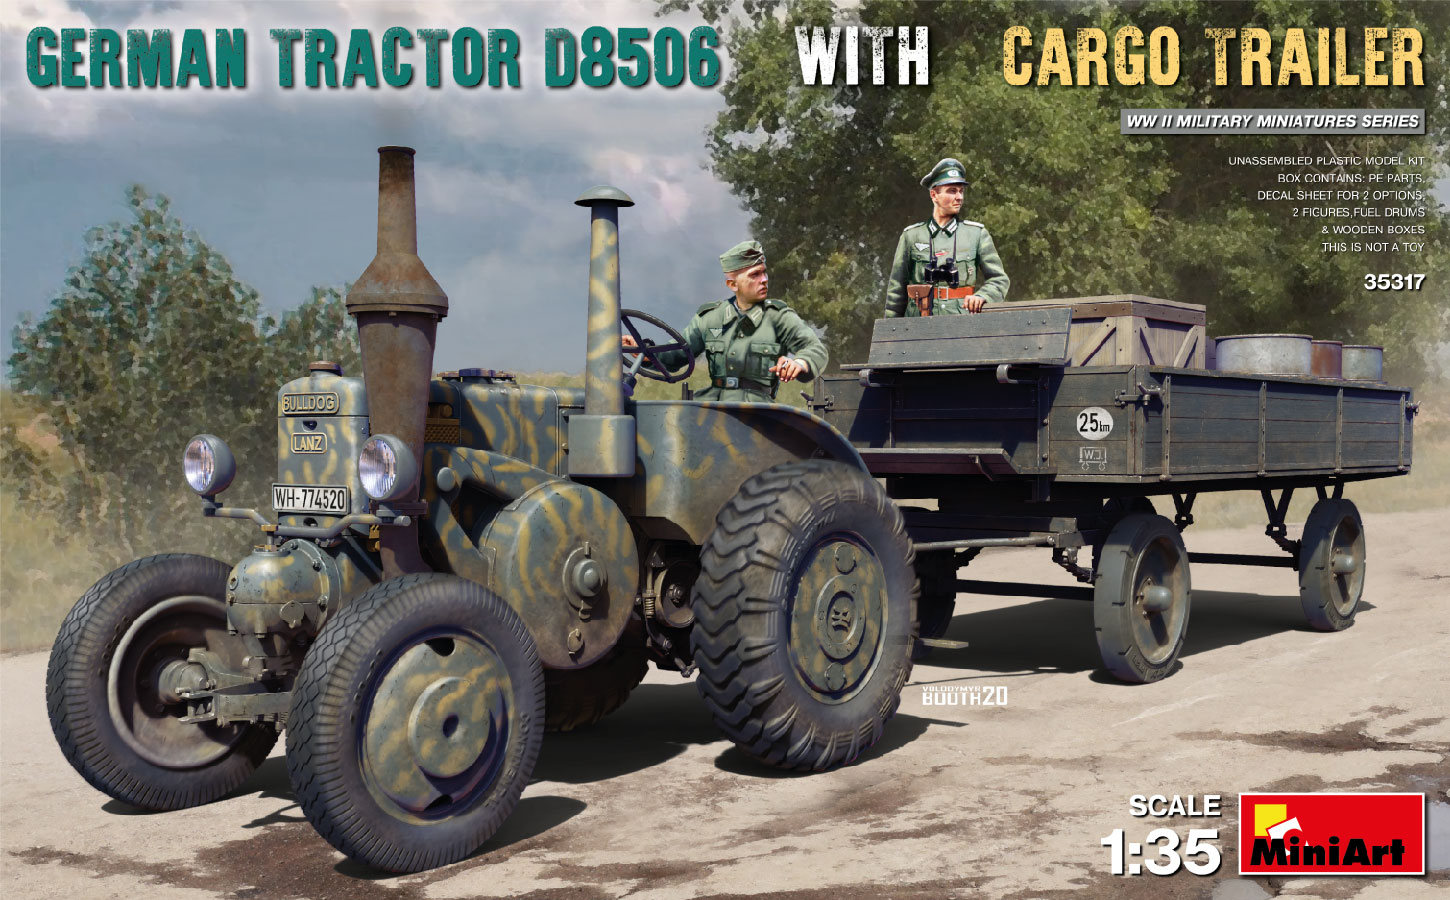 1/35 German Tractor D8506 with Cargo Trailer - Miniart